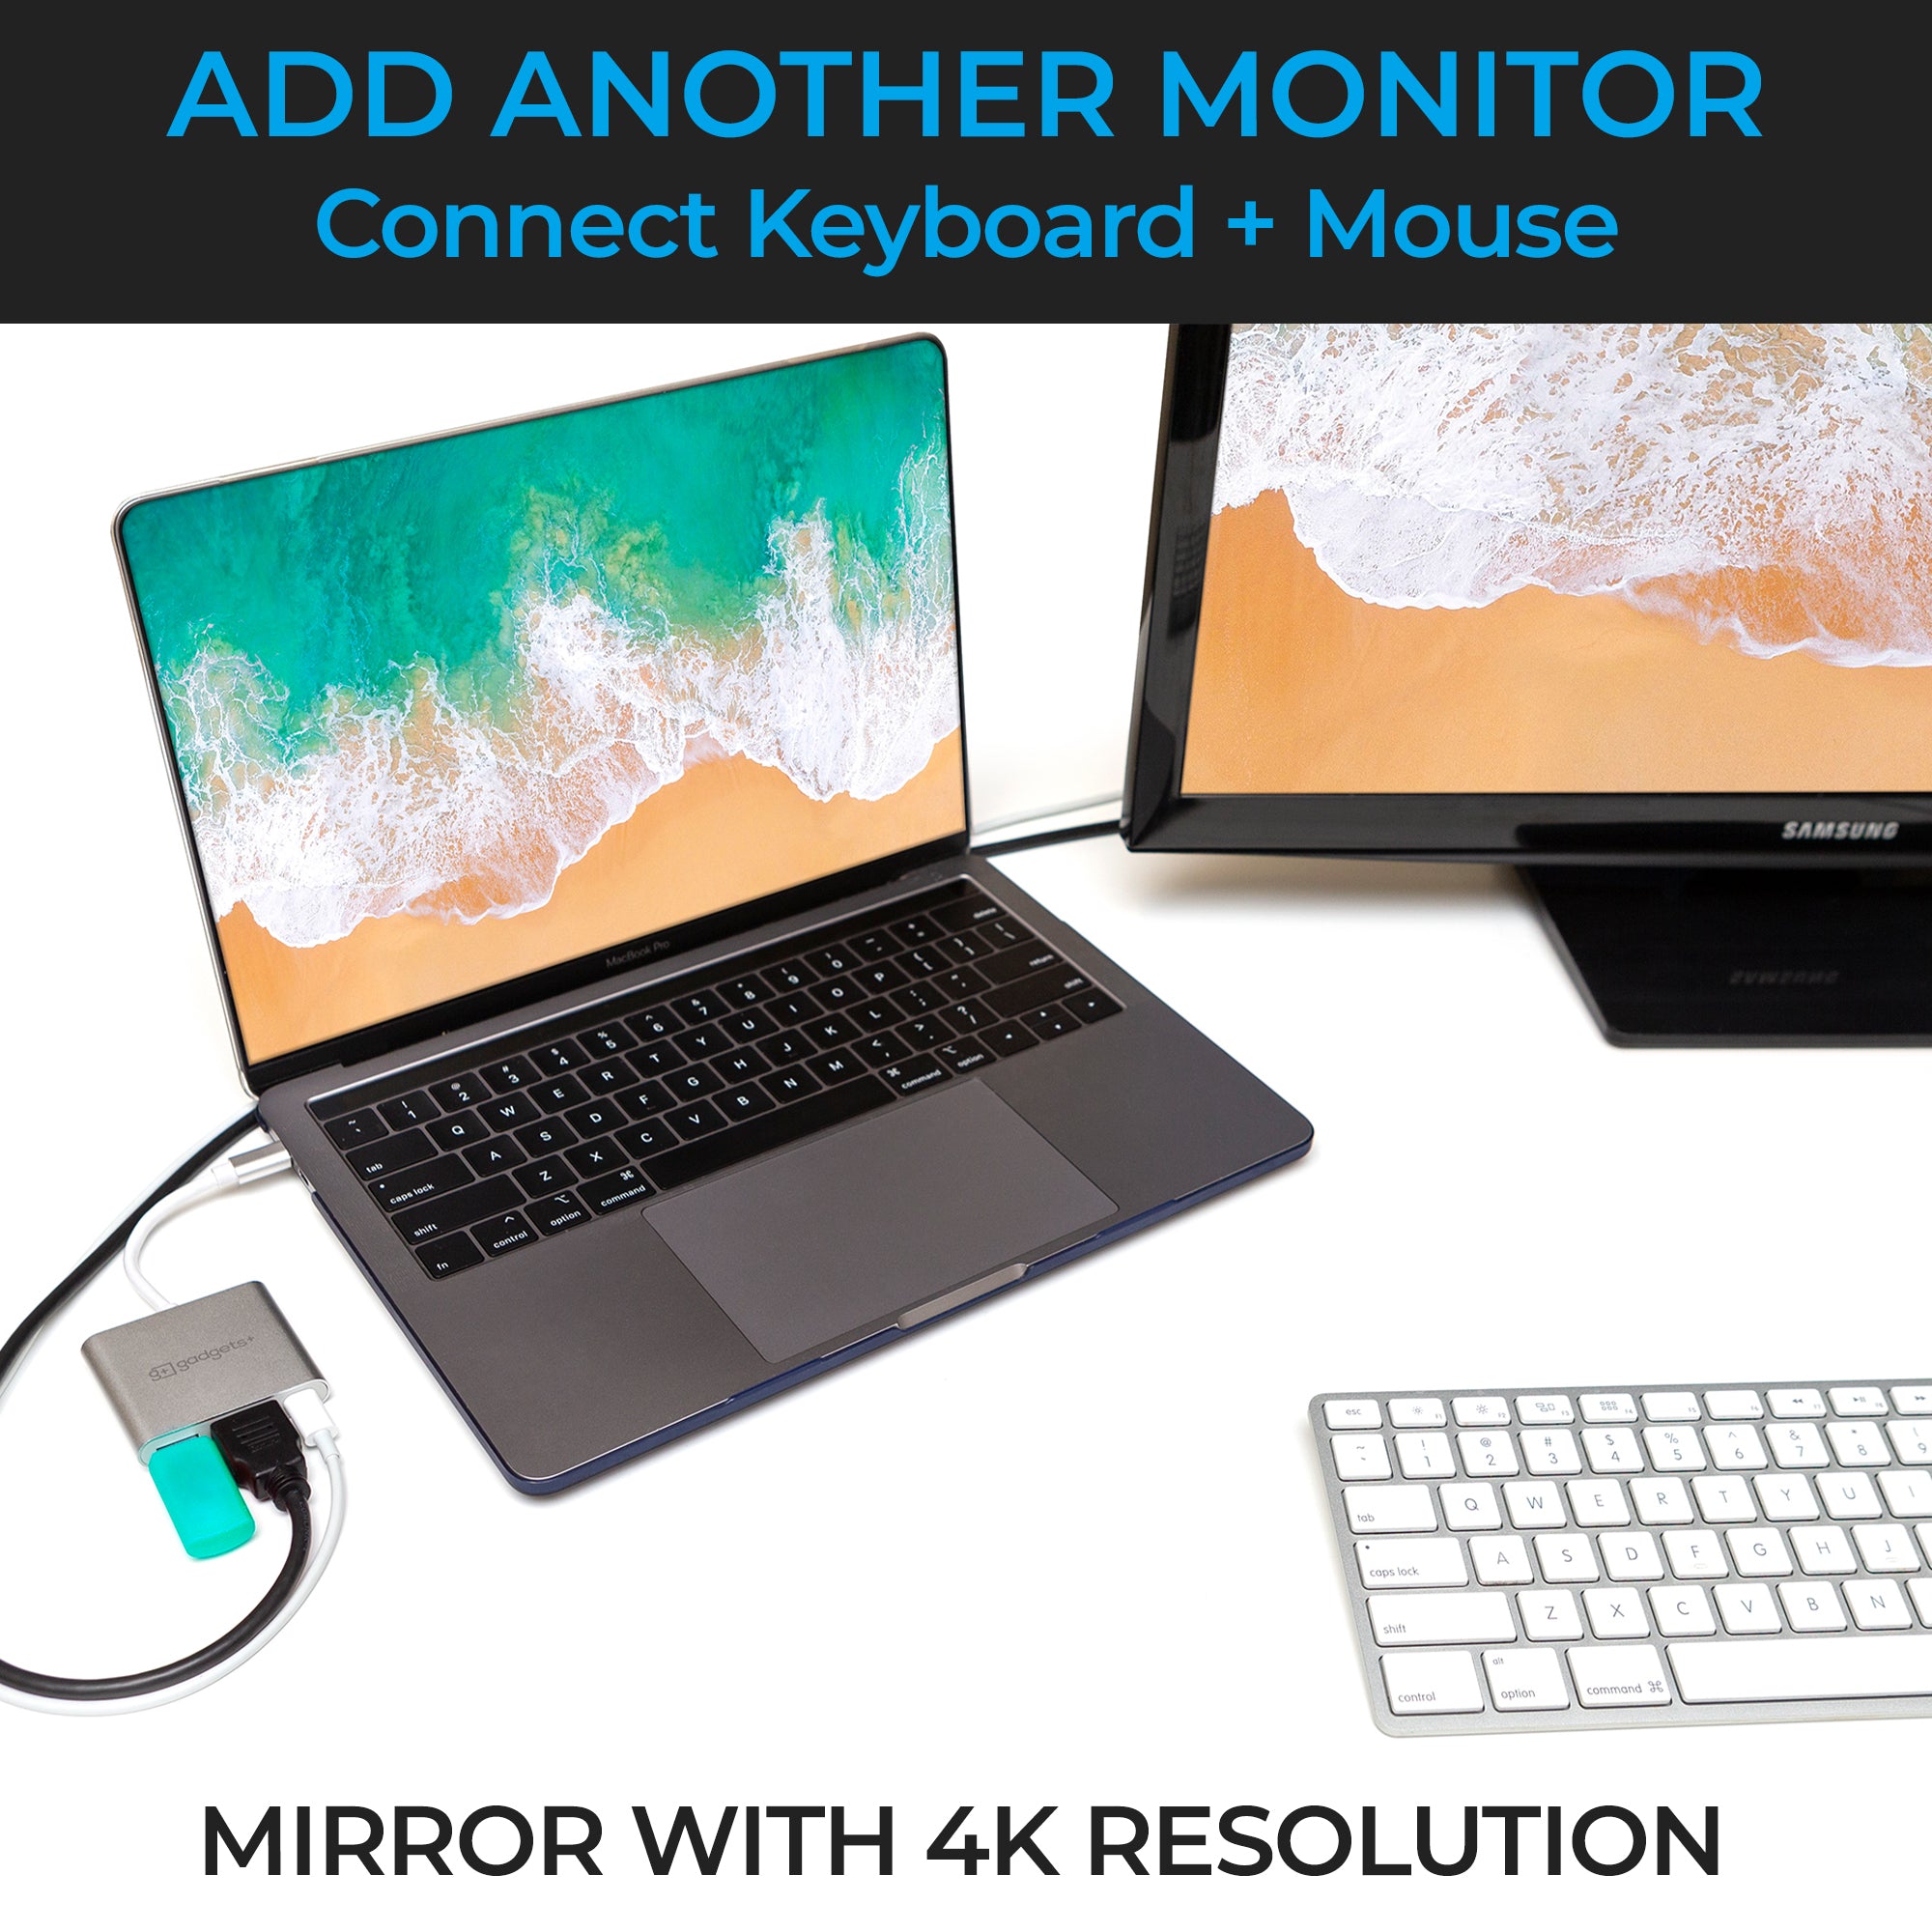 With the Gadgets Plus USB splitter you can screen mirror with 4k resolution. Connect keyboard + mouse for a sleek setup.